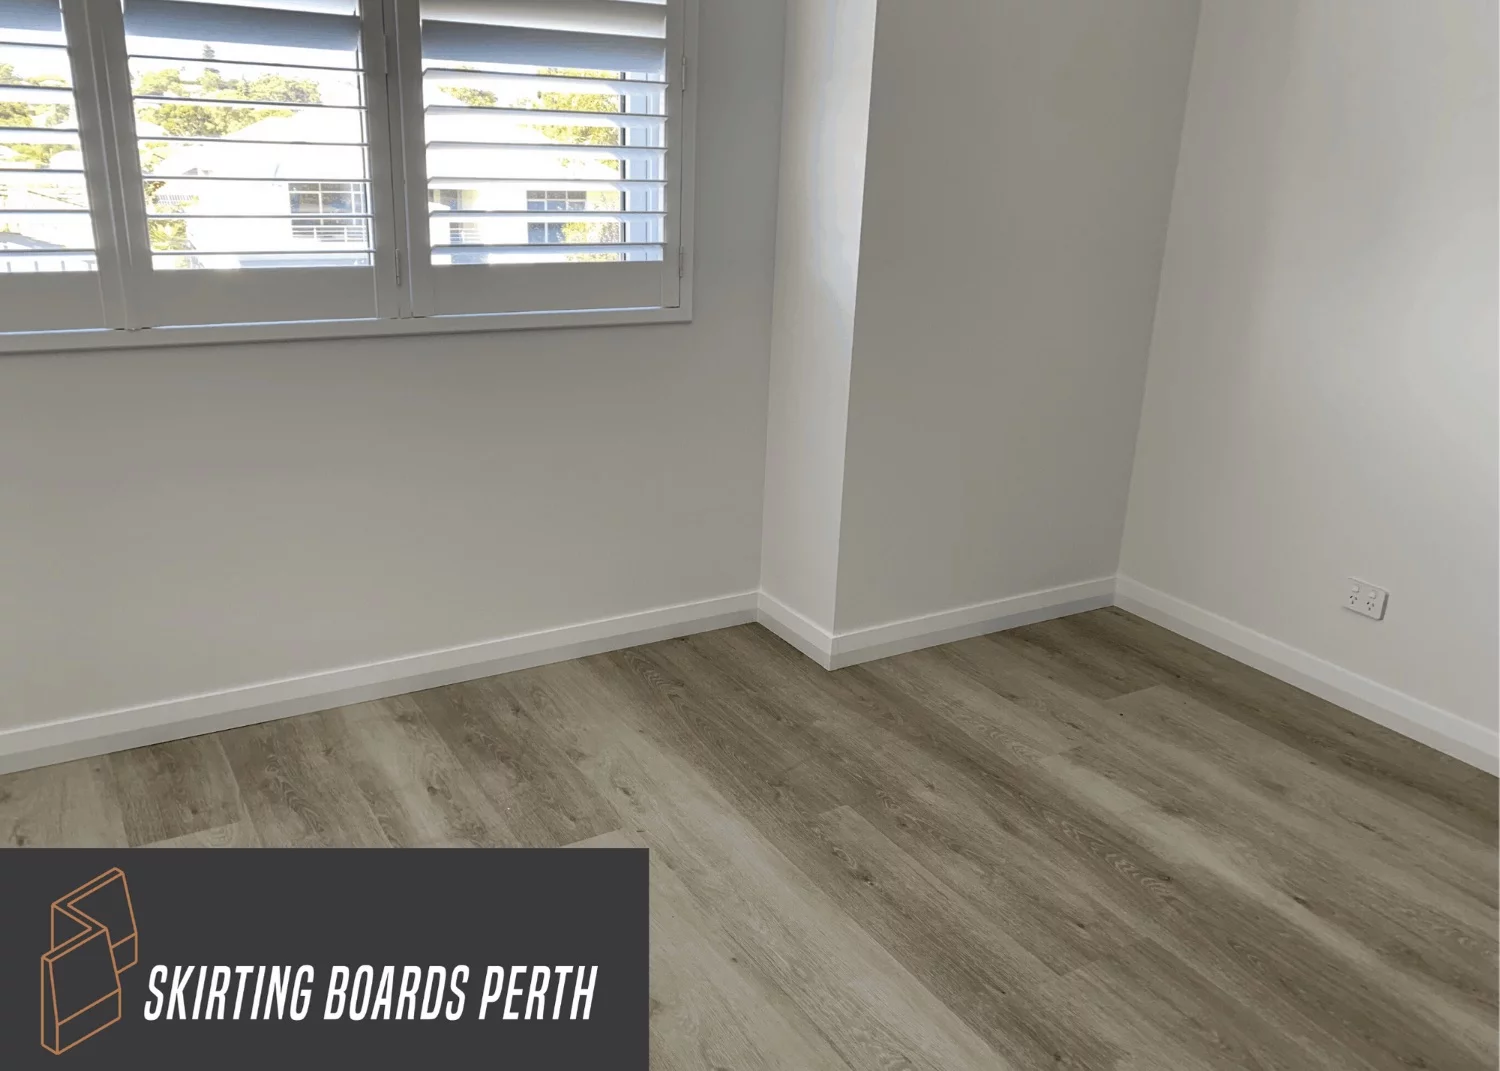 Half-Splayed skirting boards from Skirting Boards Perth